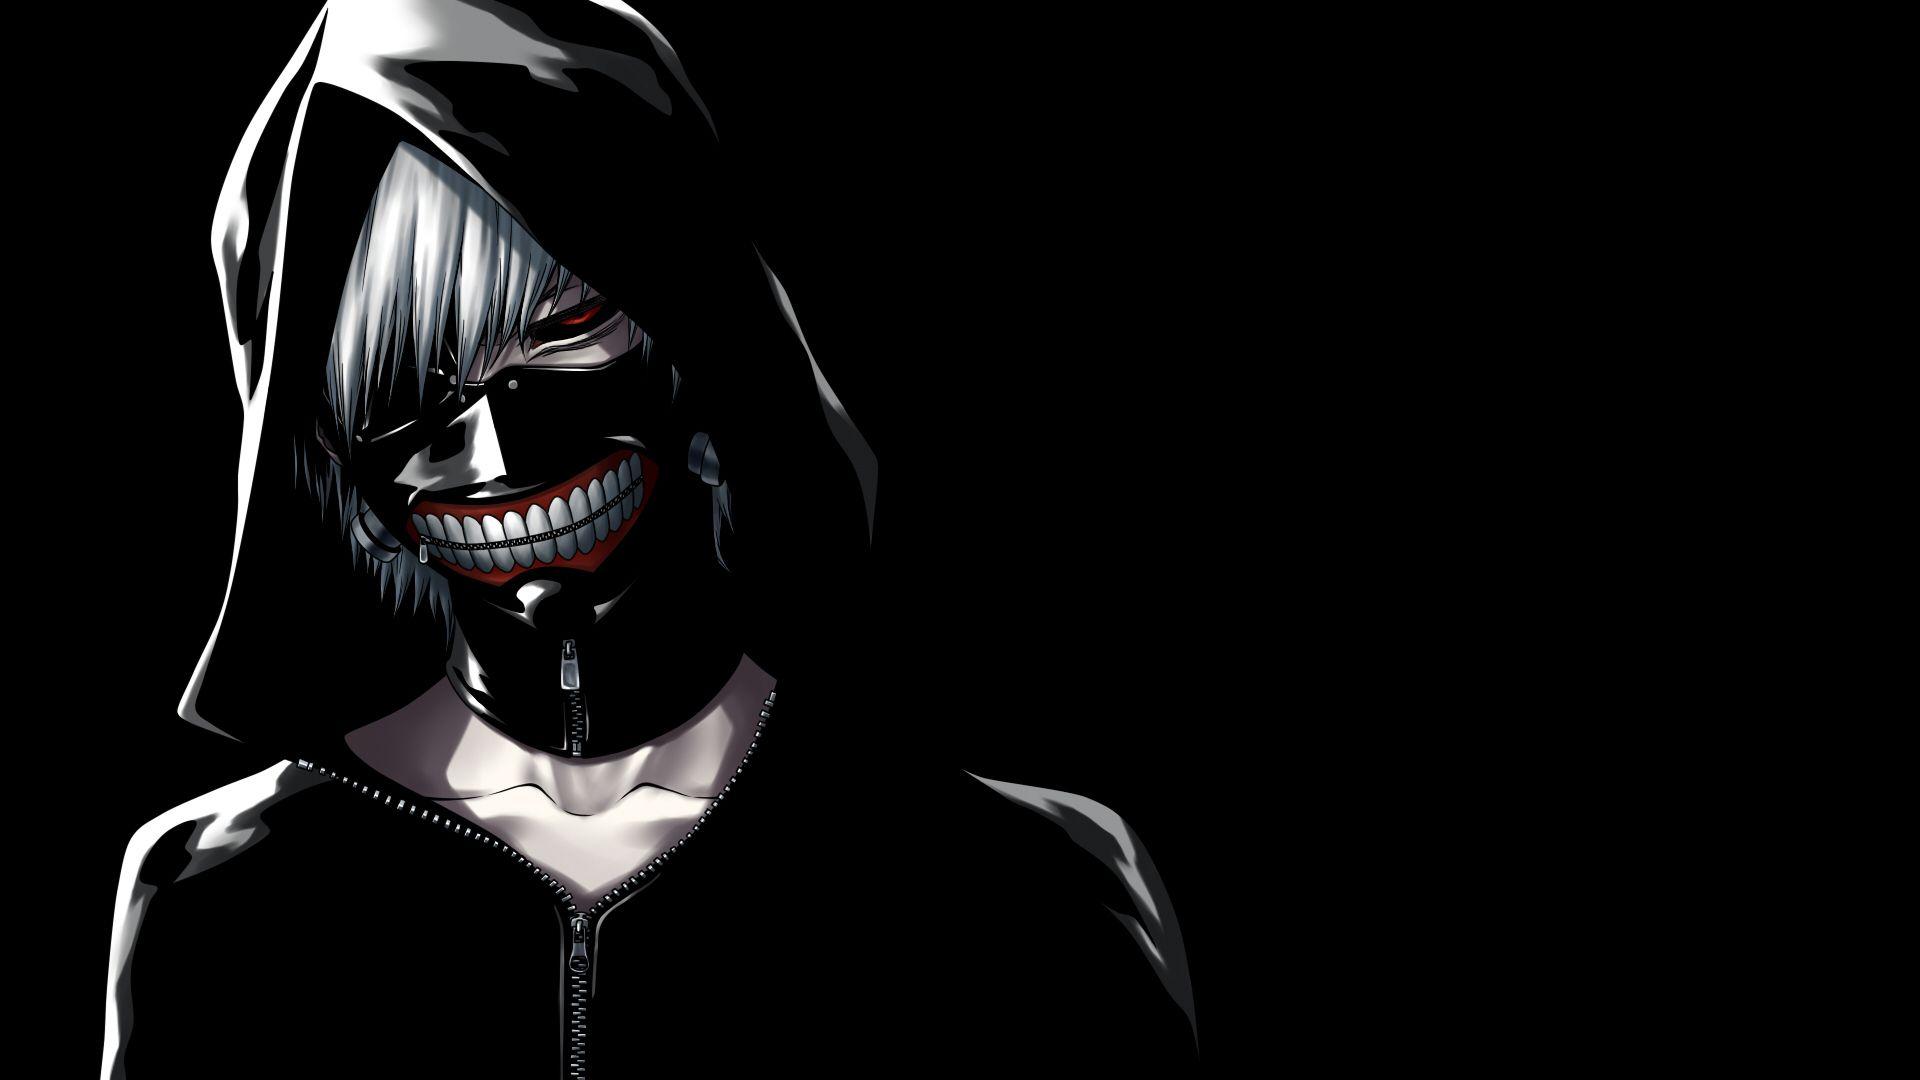 Tokyo Ghoul Wallpapers High Quality